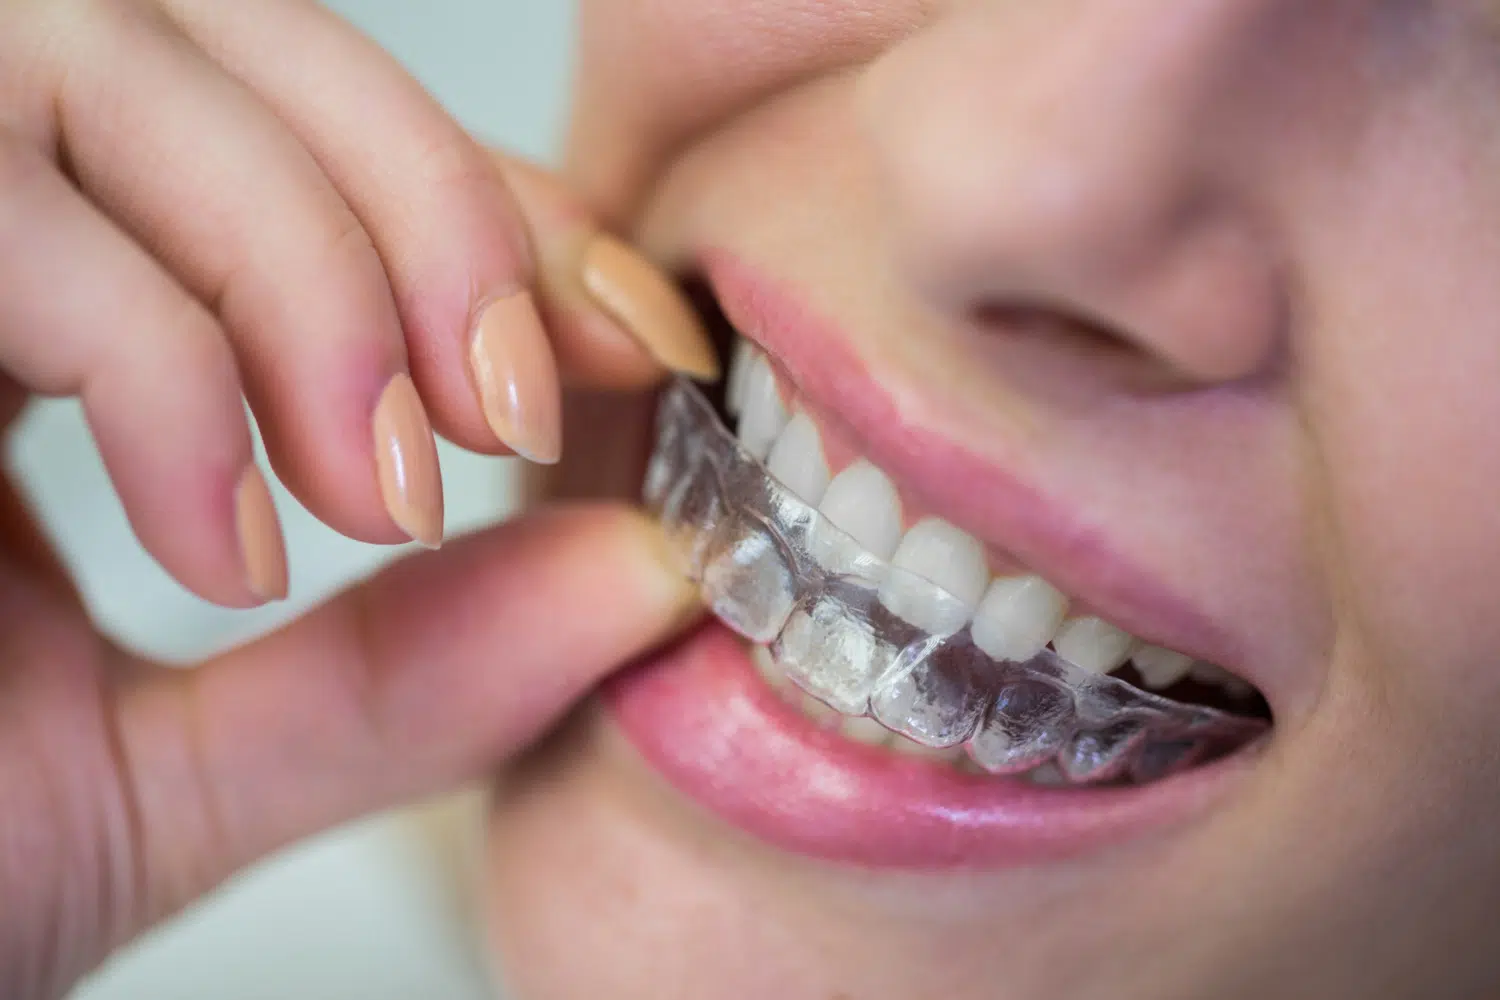 Invisalign In Puyallup Wa: How Long Do You Wear Invisalign For?